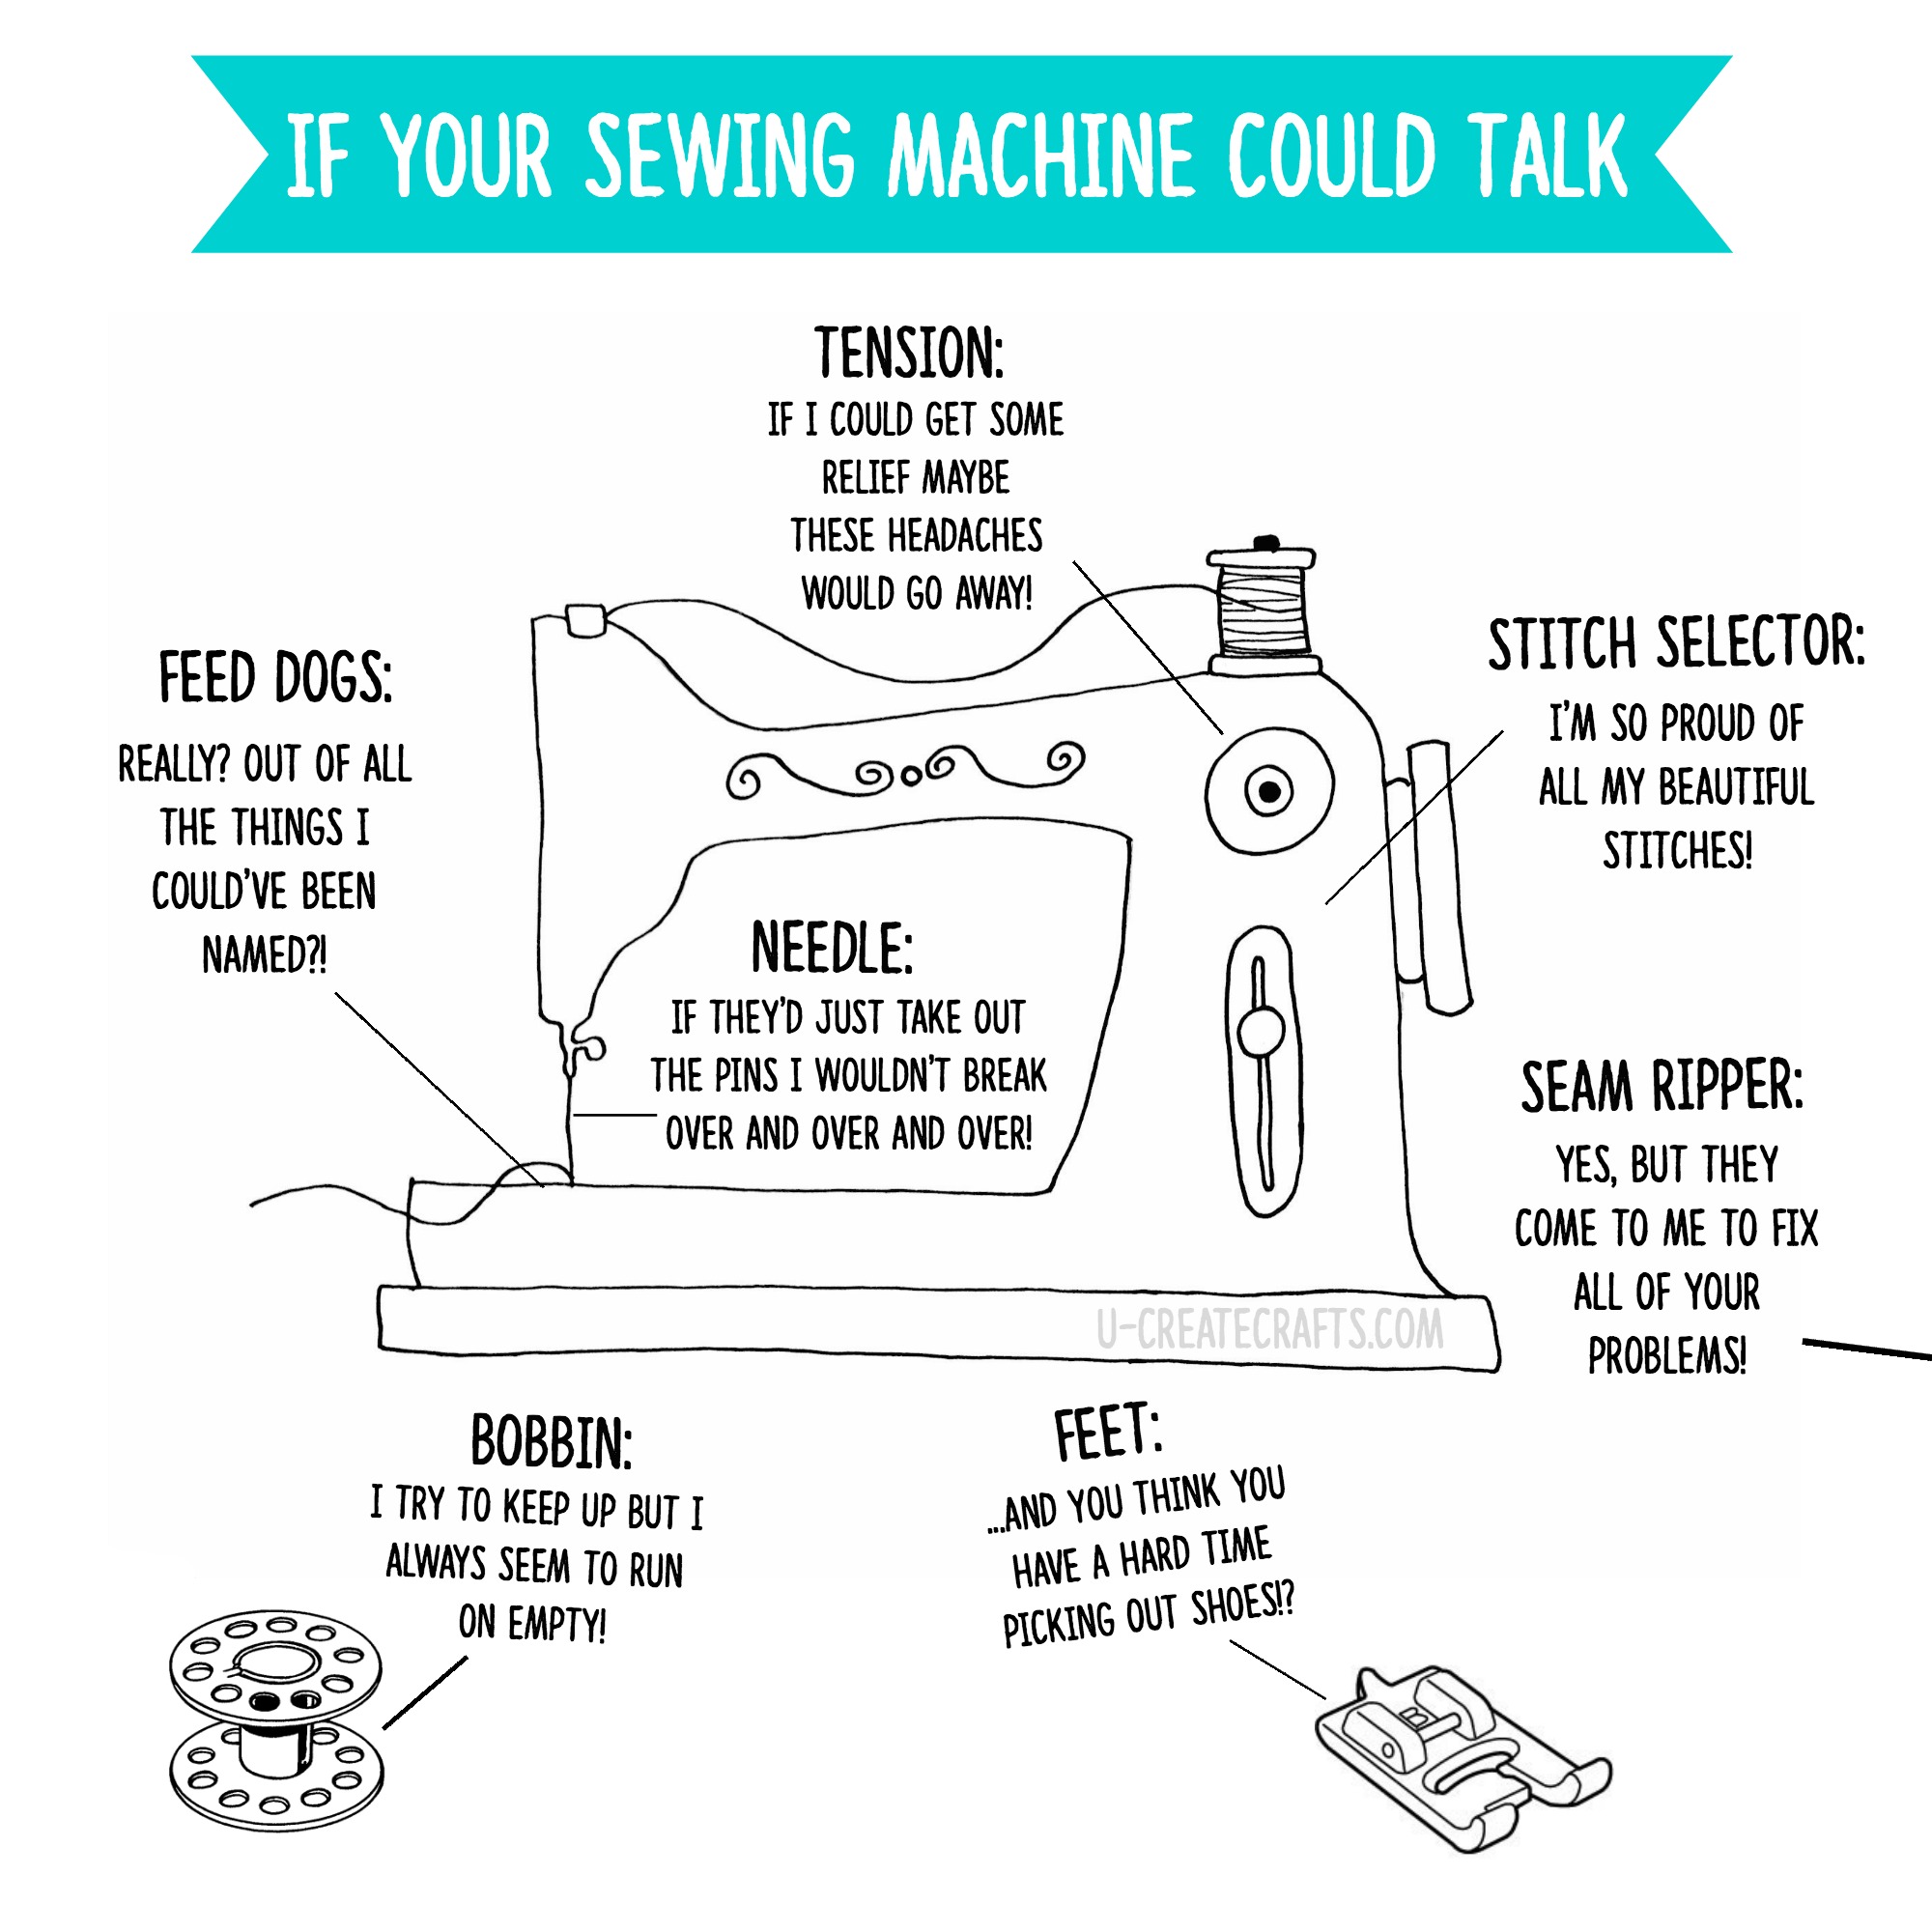 If Your Sewing Machine Could Talk2000 x 2000